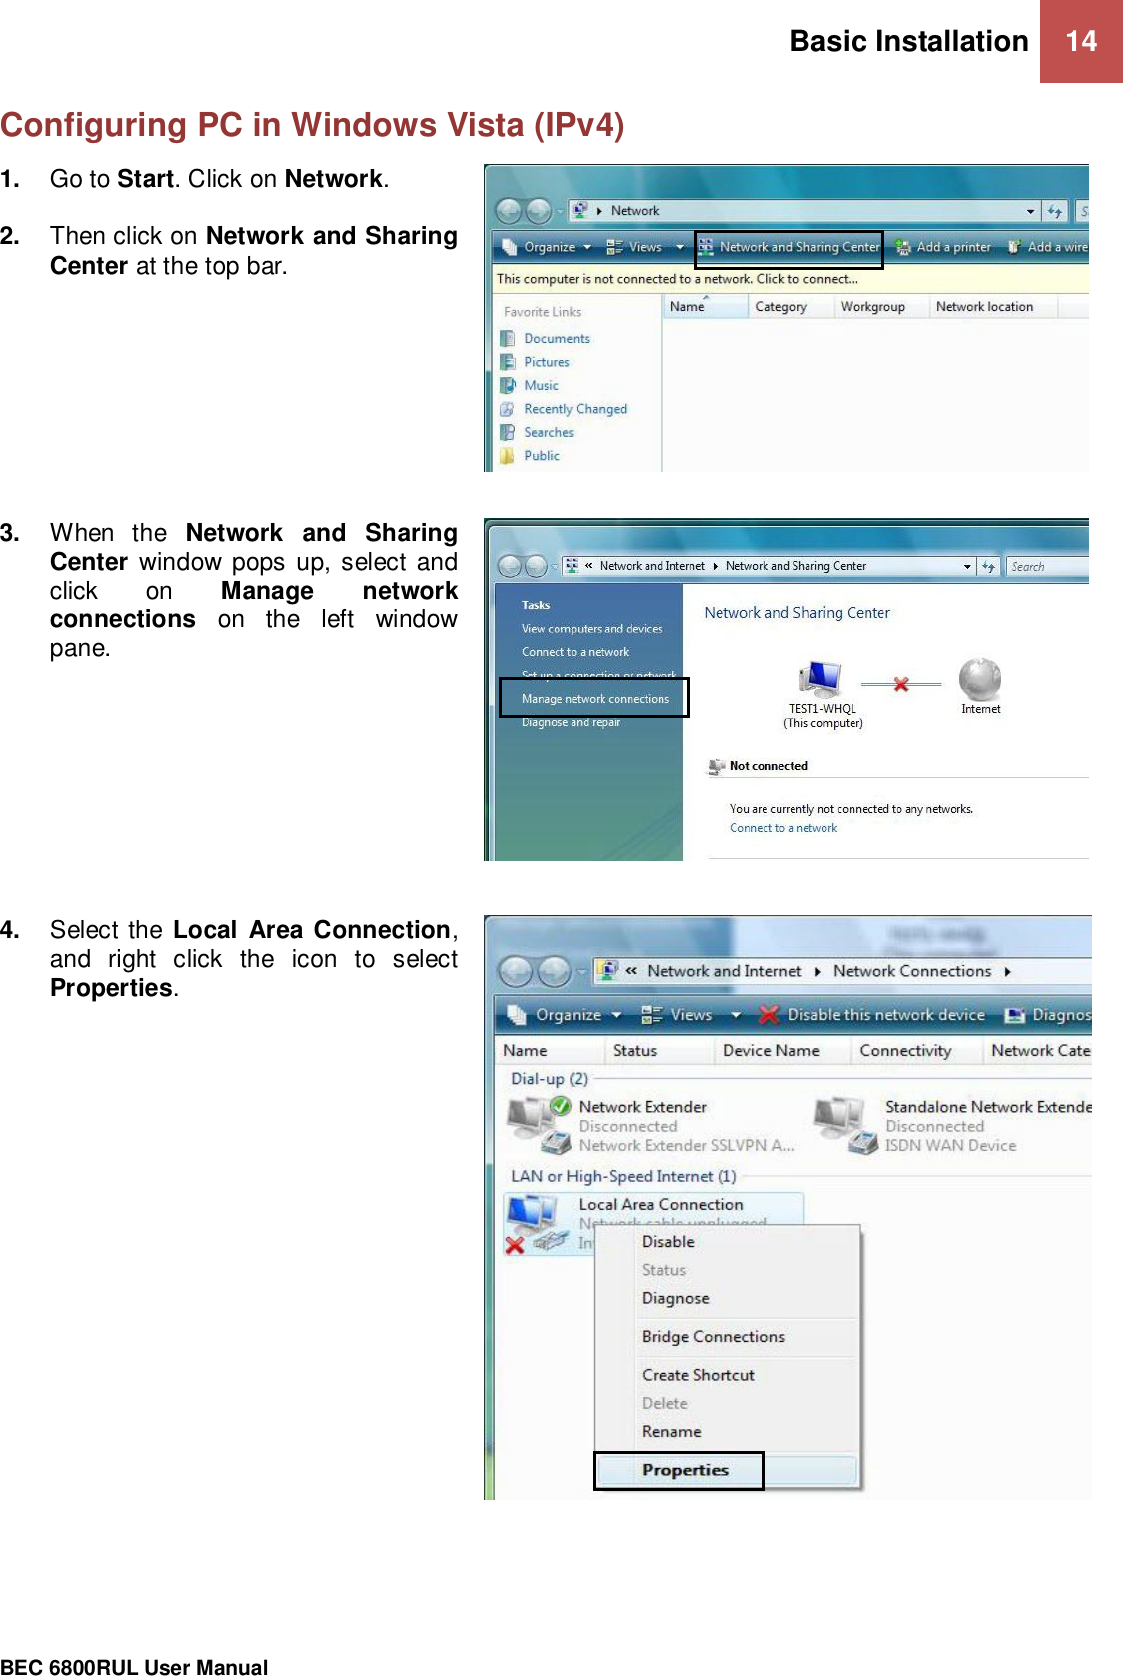 Basic Installation 14                                                 BEC 6800RUL User Manual  Configuring PC in Windows Vista (IPv4)     1. Go to Start. Click on Network.  2. Then click on Network and Sharing Center at the top bar.  3. When  the  Network  and  Sharing Center  window pops up, select and click  on  Manage  network connections  on  the  left  window pane.  4. Select the Local  Area Connection, and  right  click  the  icon  to  select Properties.  